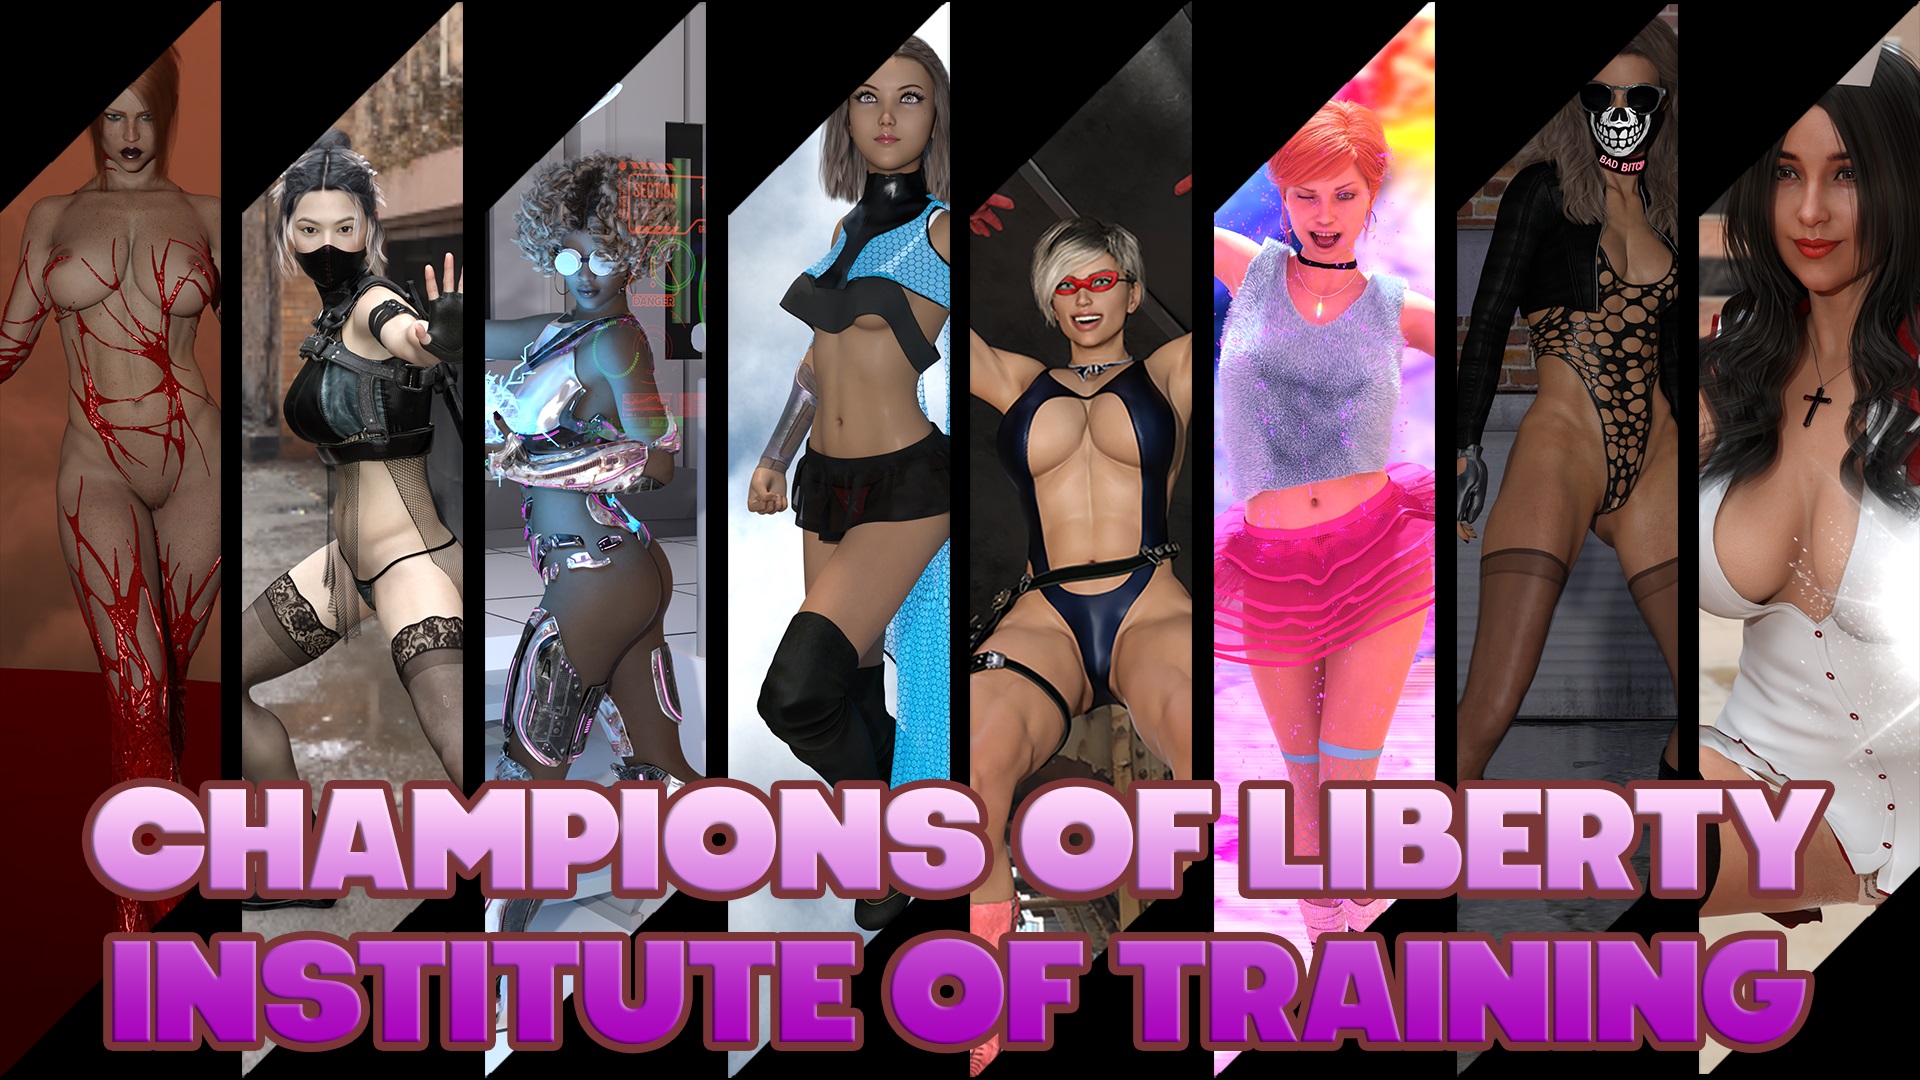 Champions of Liberty Institute of Training